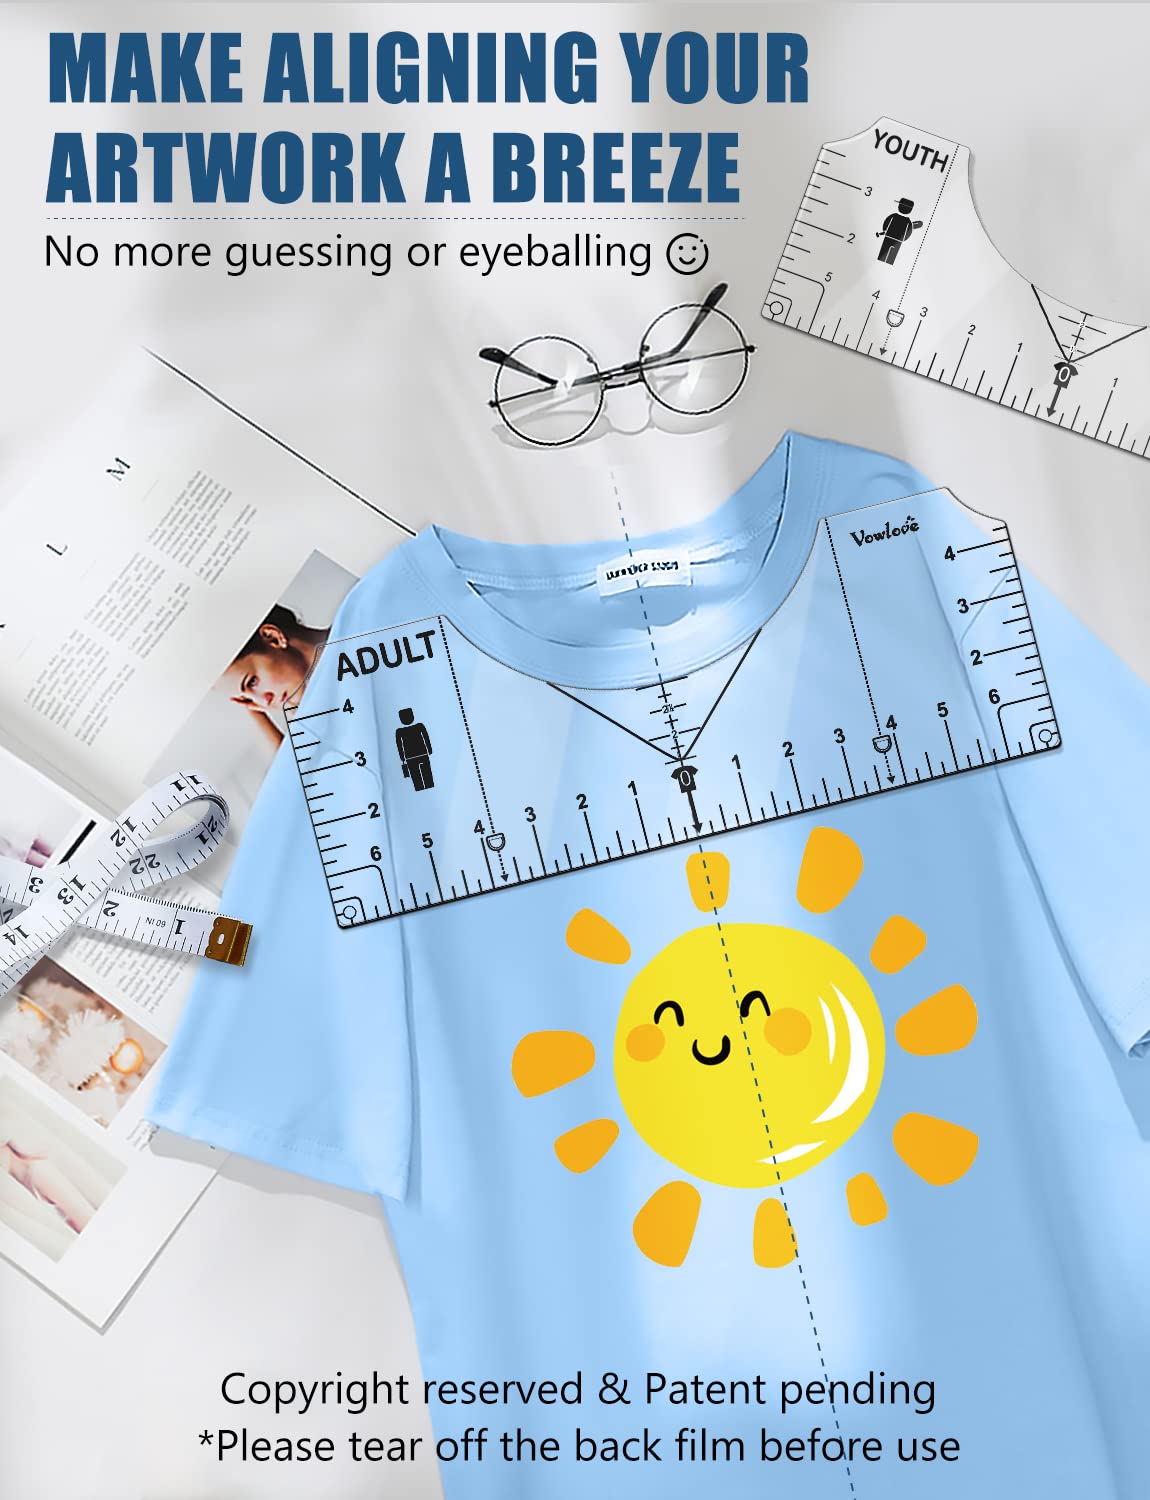  Tshirt Ruler Kit - 9Pcs, Transparent High Quality Tshirt  Ruler Guide For Vinyl Alignment To Center Designs, Shirt Ruler For Vinyl  Alignment, T Ruler For Infant Toddler Youth Adult